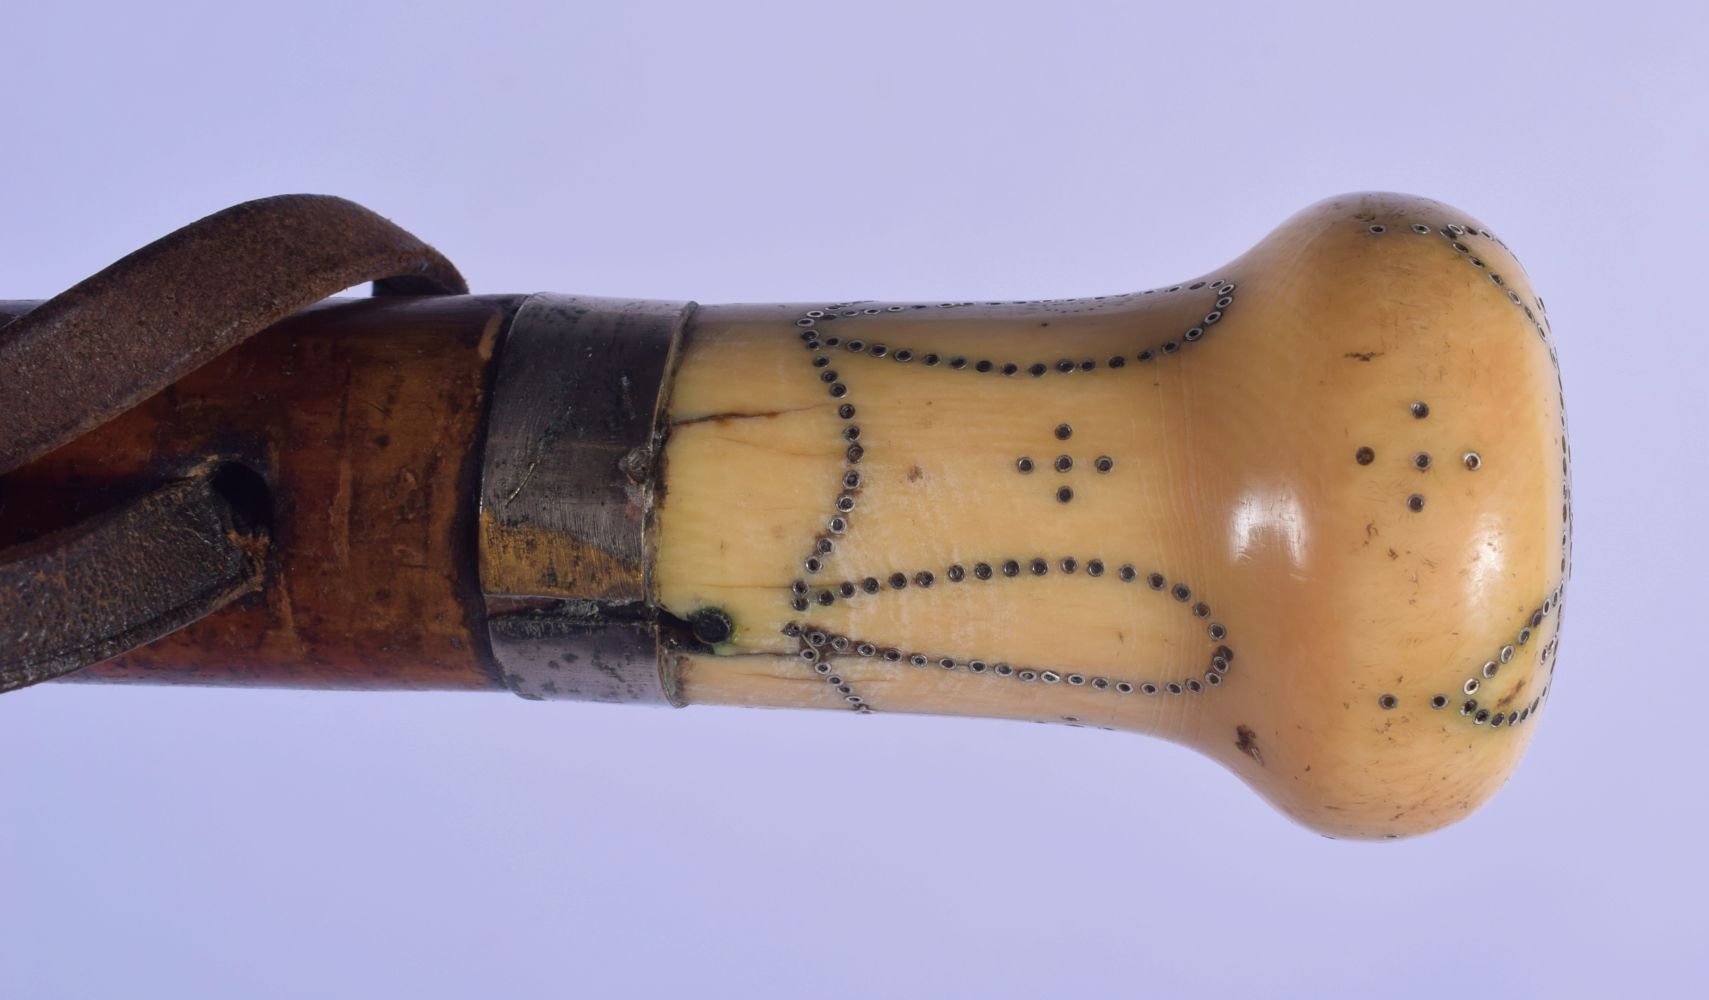 AN EARLY 18TH CENTURY CARVED IVORY PIQUE WORK SILVER INLAID IVORY WALKING CANE C1701. 85 cm long. - Image 2 of 5